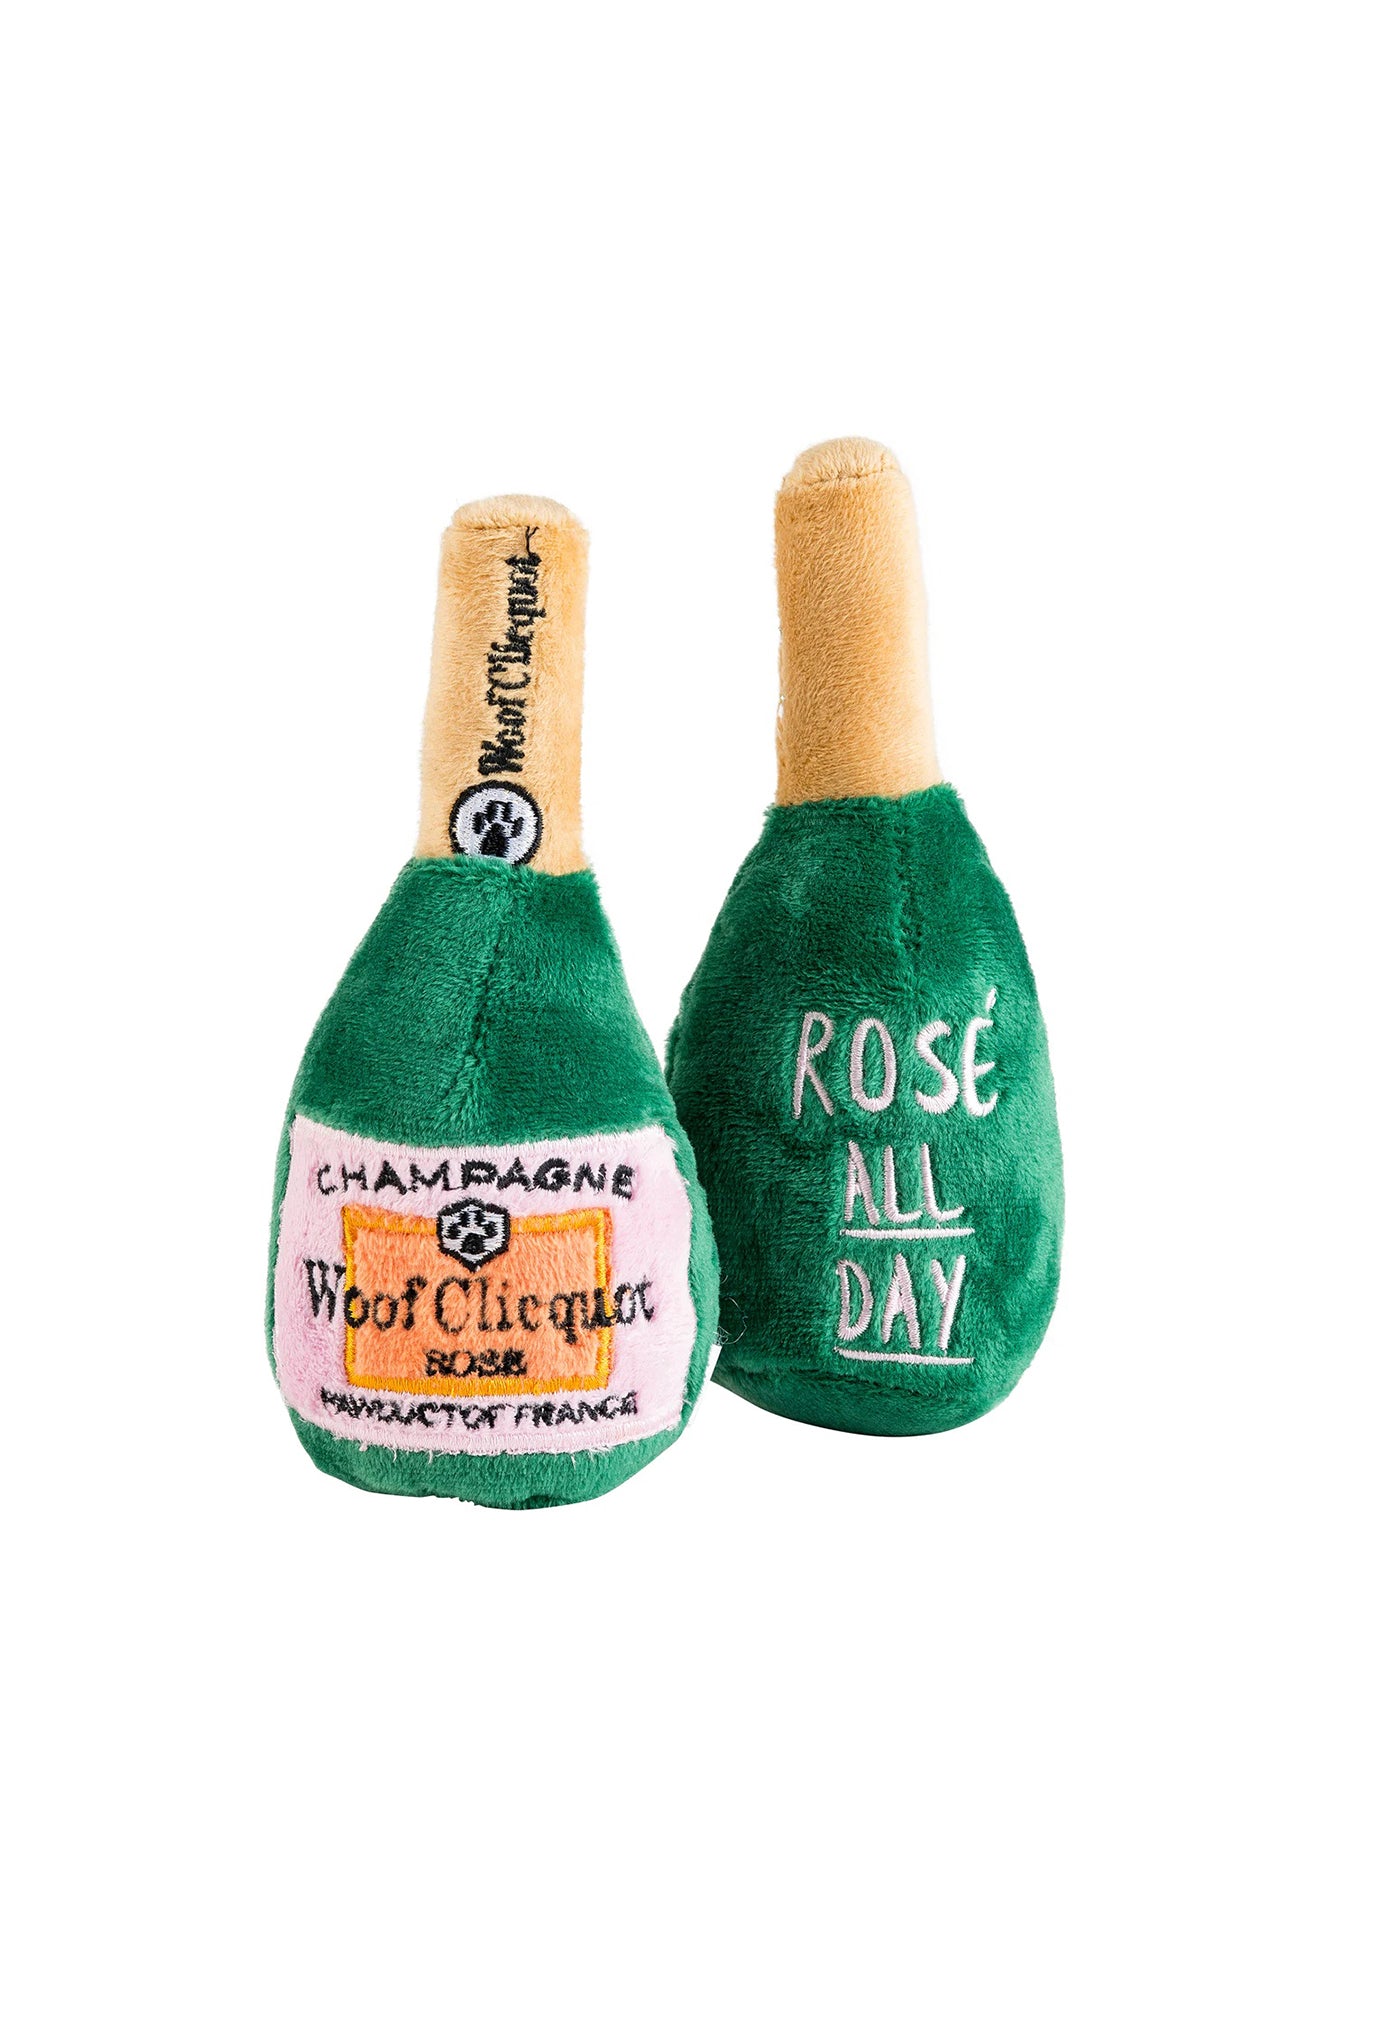 Woof Clicquot Rose' Campagne Bottle sold by Angel Divine